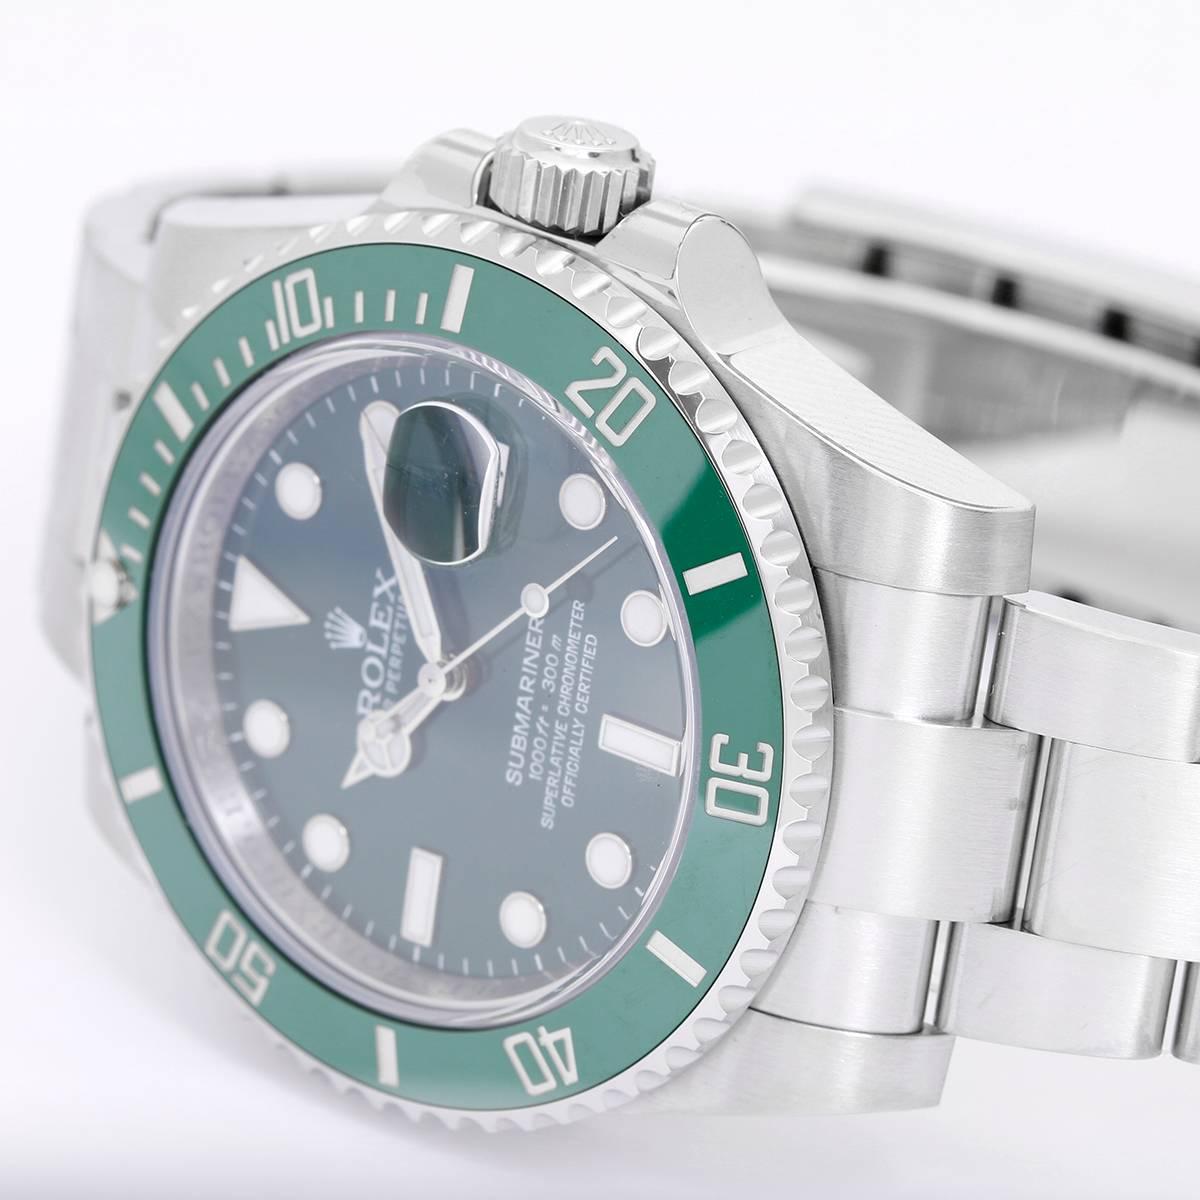 Rolex Submariner Men's Stainless Steel Green Dial Watch 116610LV -  Automatic winding, 31 jewels, pressure proof to 1,000 feet. Stainless steel case with green time-lapse Ceramic Cerachrom bezel (40mm diameter). Green dial with luminous markers;